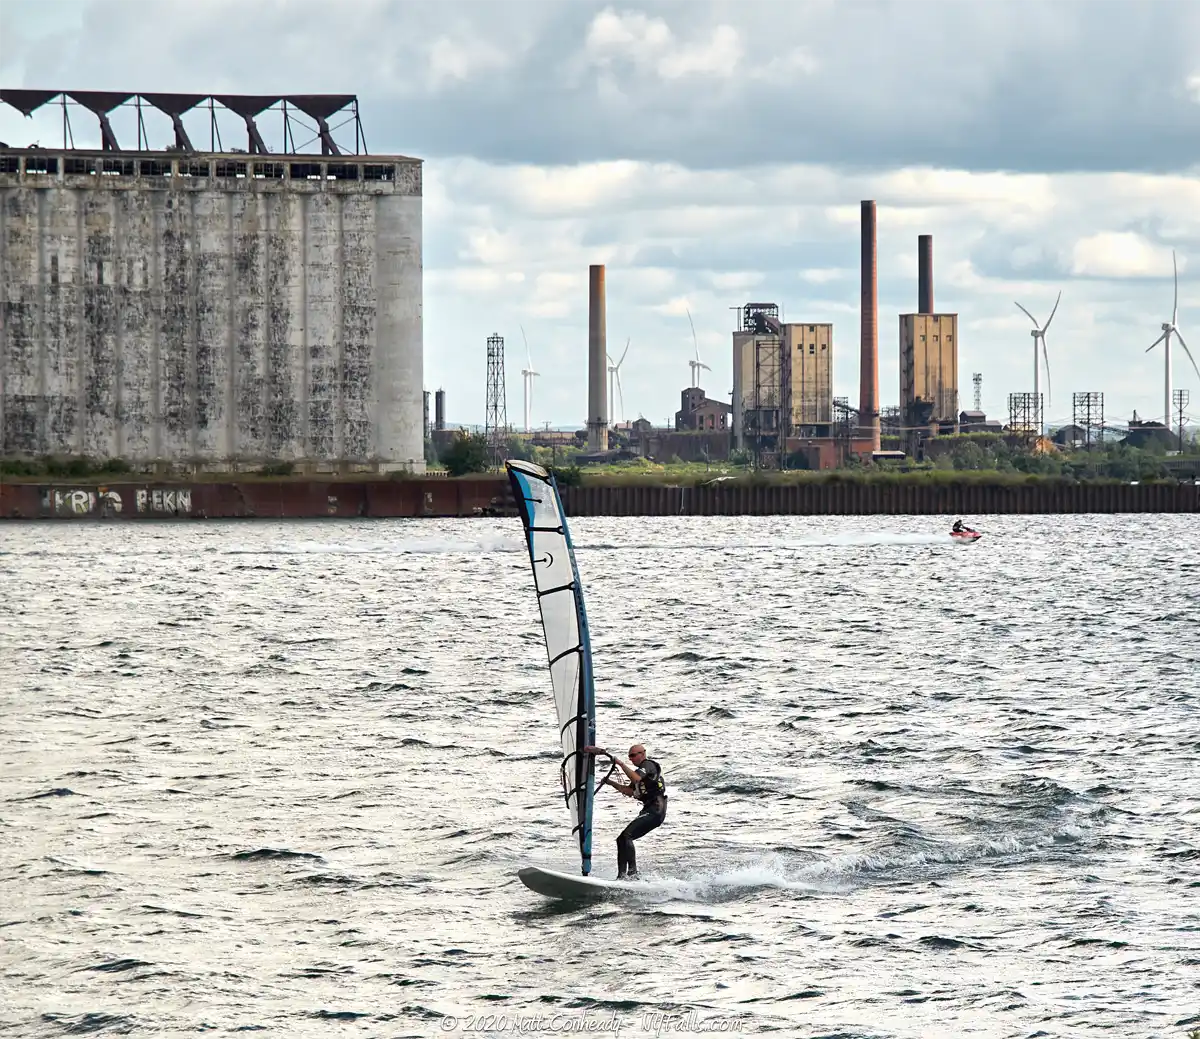 A sailboarder riding on Lake Erie just off Gallagher Beach